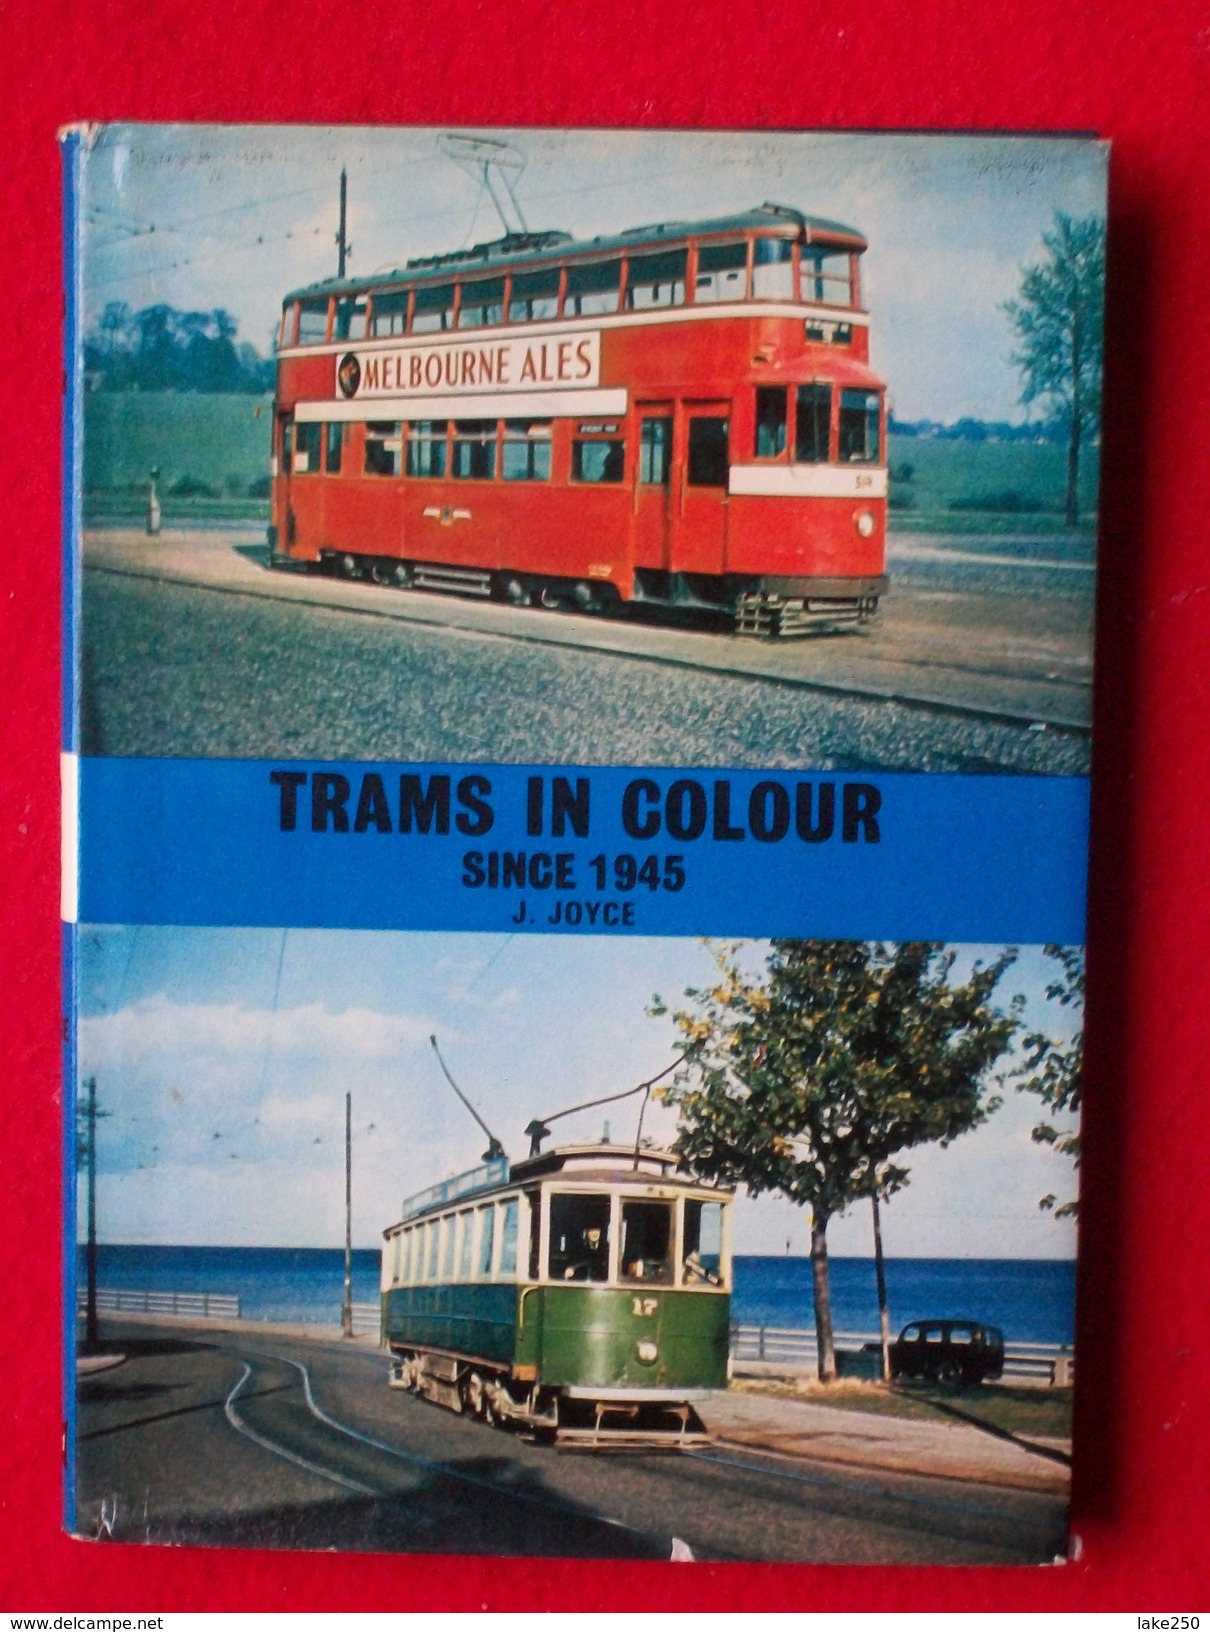 TRAMS IN COLOUR SINCE 1945 - Transportation